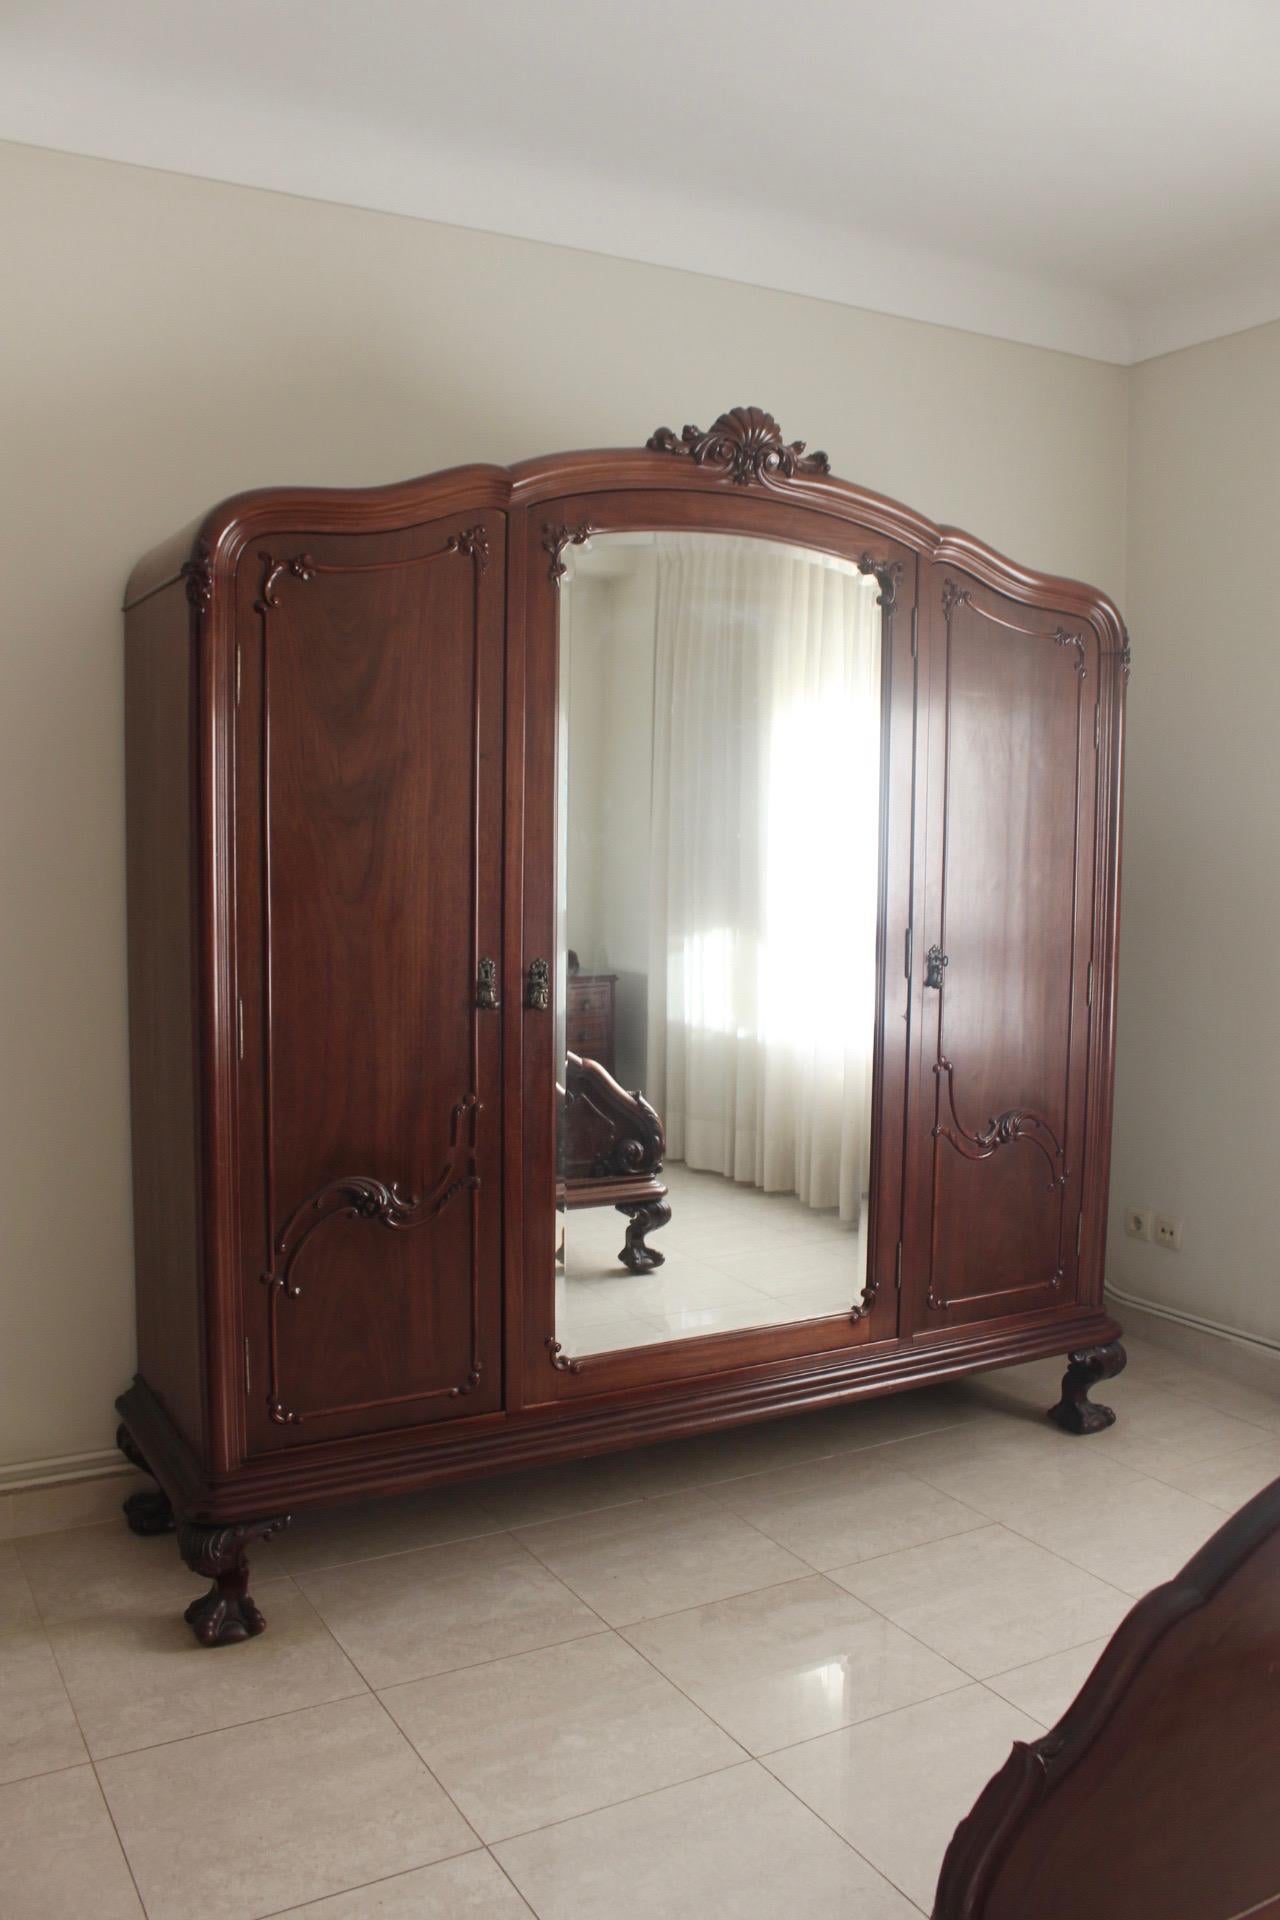 Stunning, marvellous 19th century English Chippendale style ball and claw mahogany armoire or wardrobe with 3 vanity mirrors. This wardrobe was made in London, circa 1890s.
Several drawers and cabinets.
The piece remains in excellent condition. We